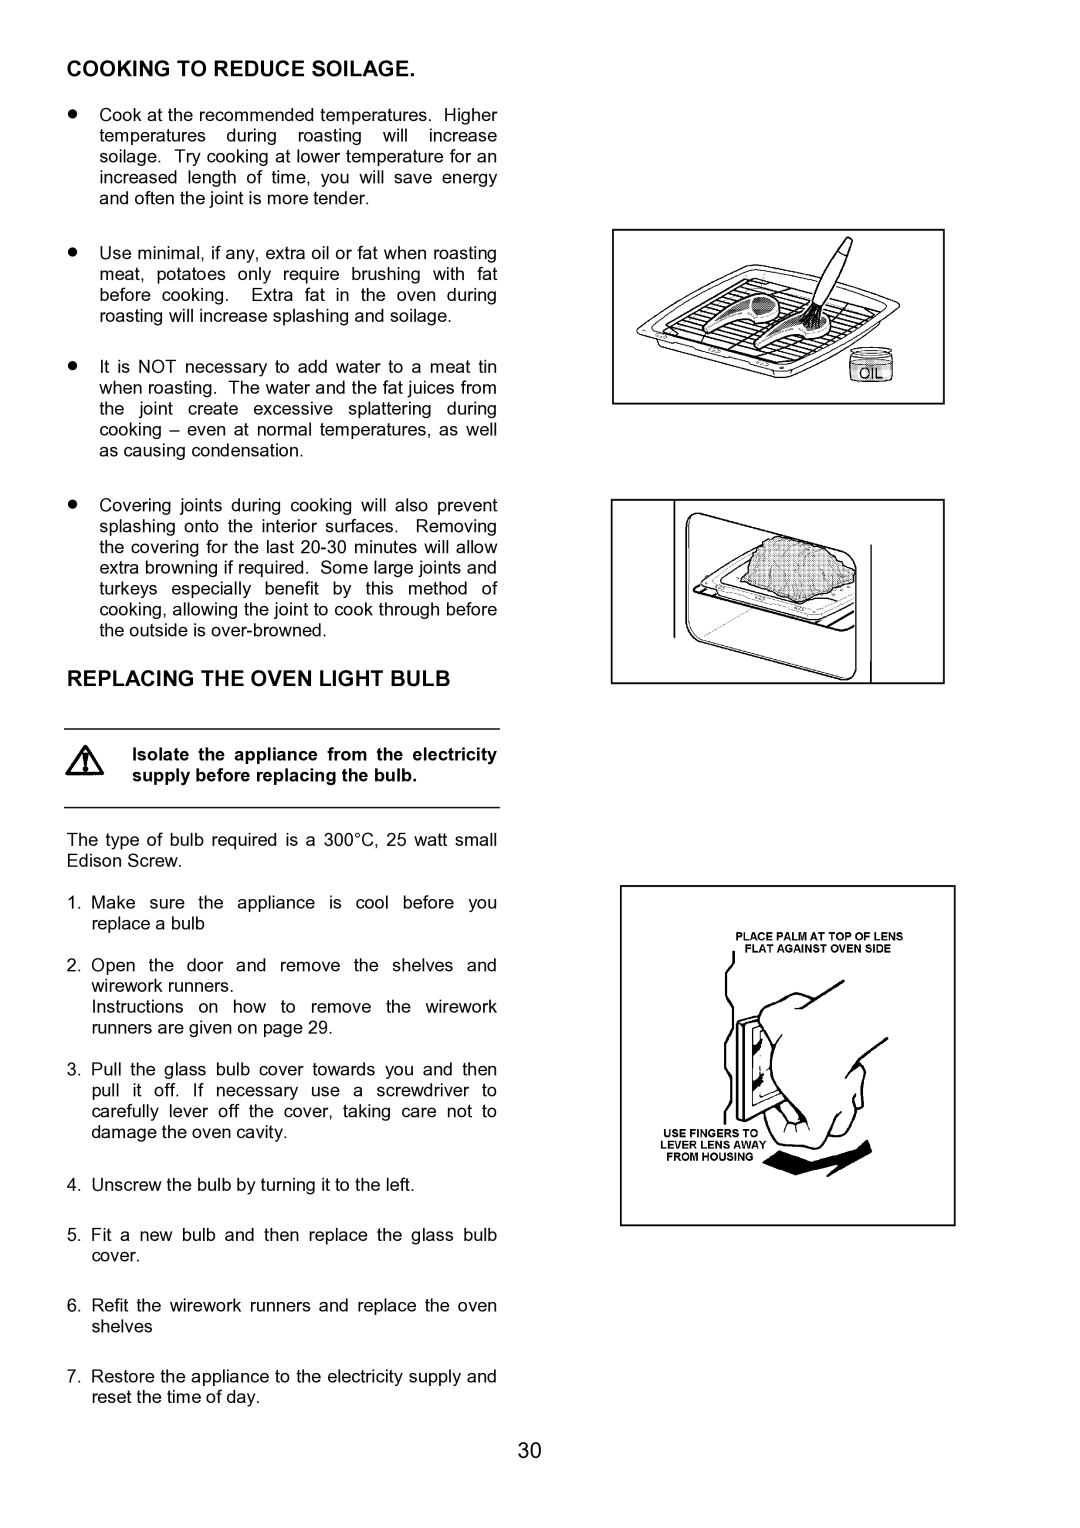 Zanussi ZHF 470 manual Cooking to Reduce Soilage, Replacing the Oven Light Bulb 